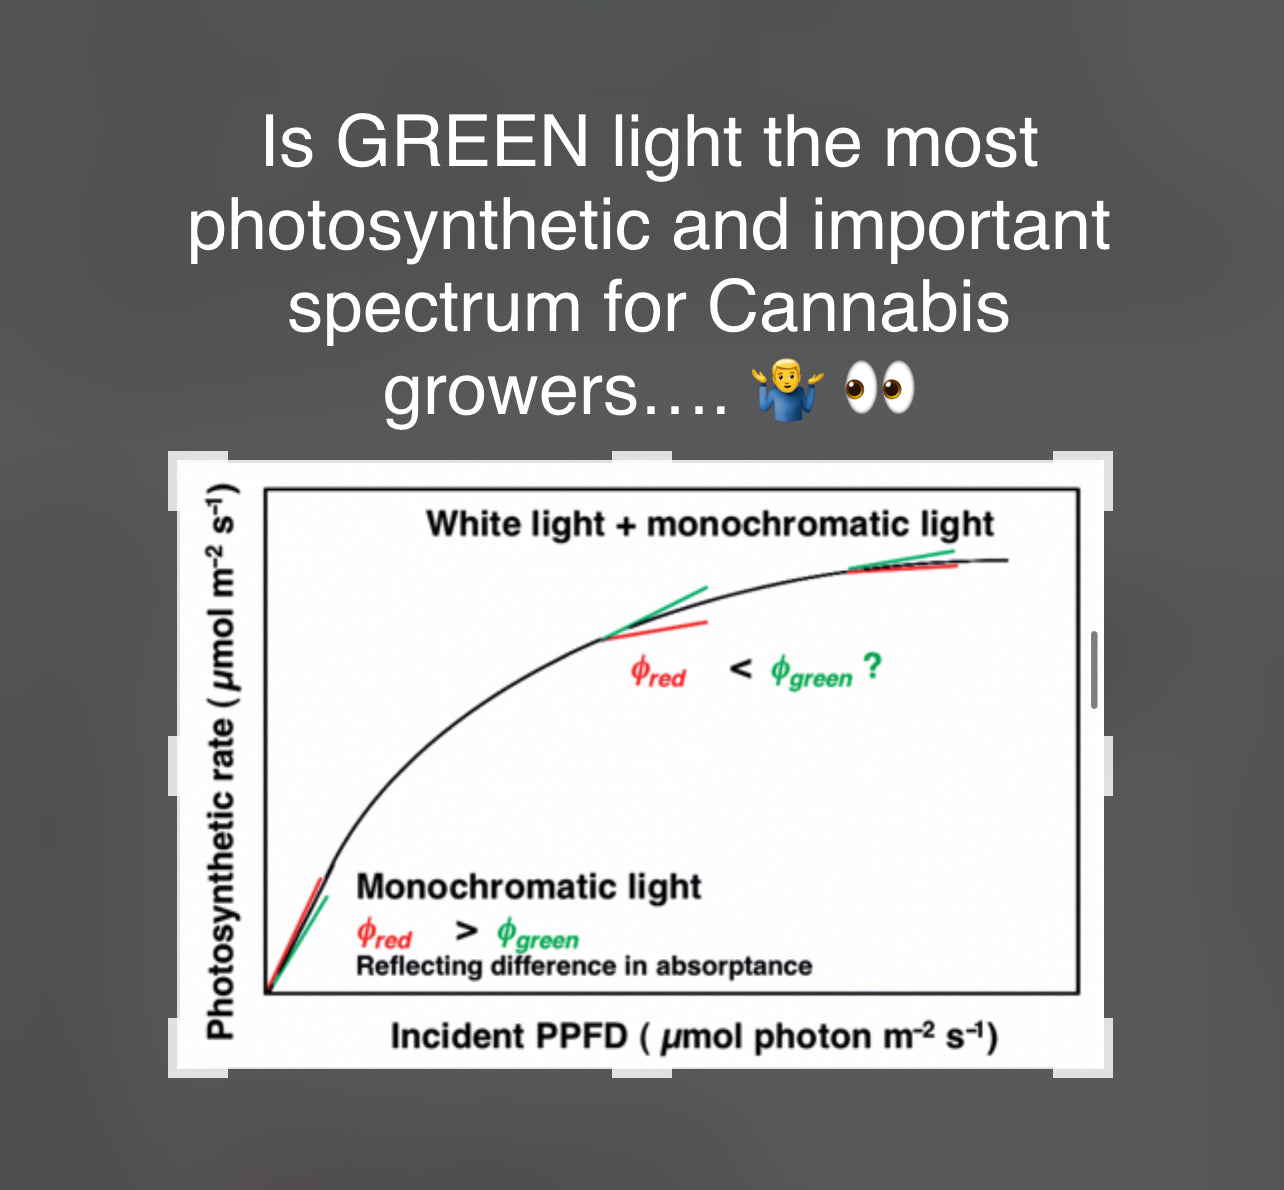 Is Green the most Photosynthetic light for Cannabis growers?